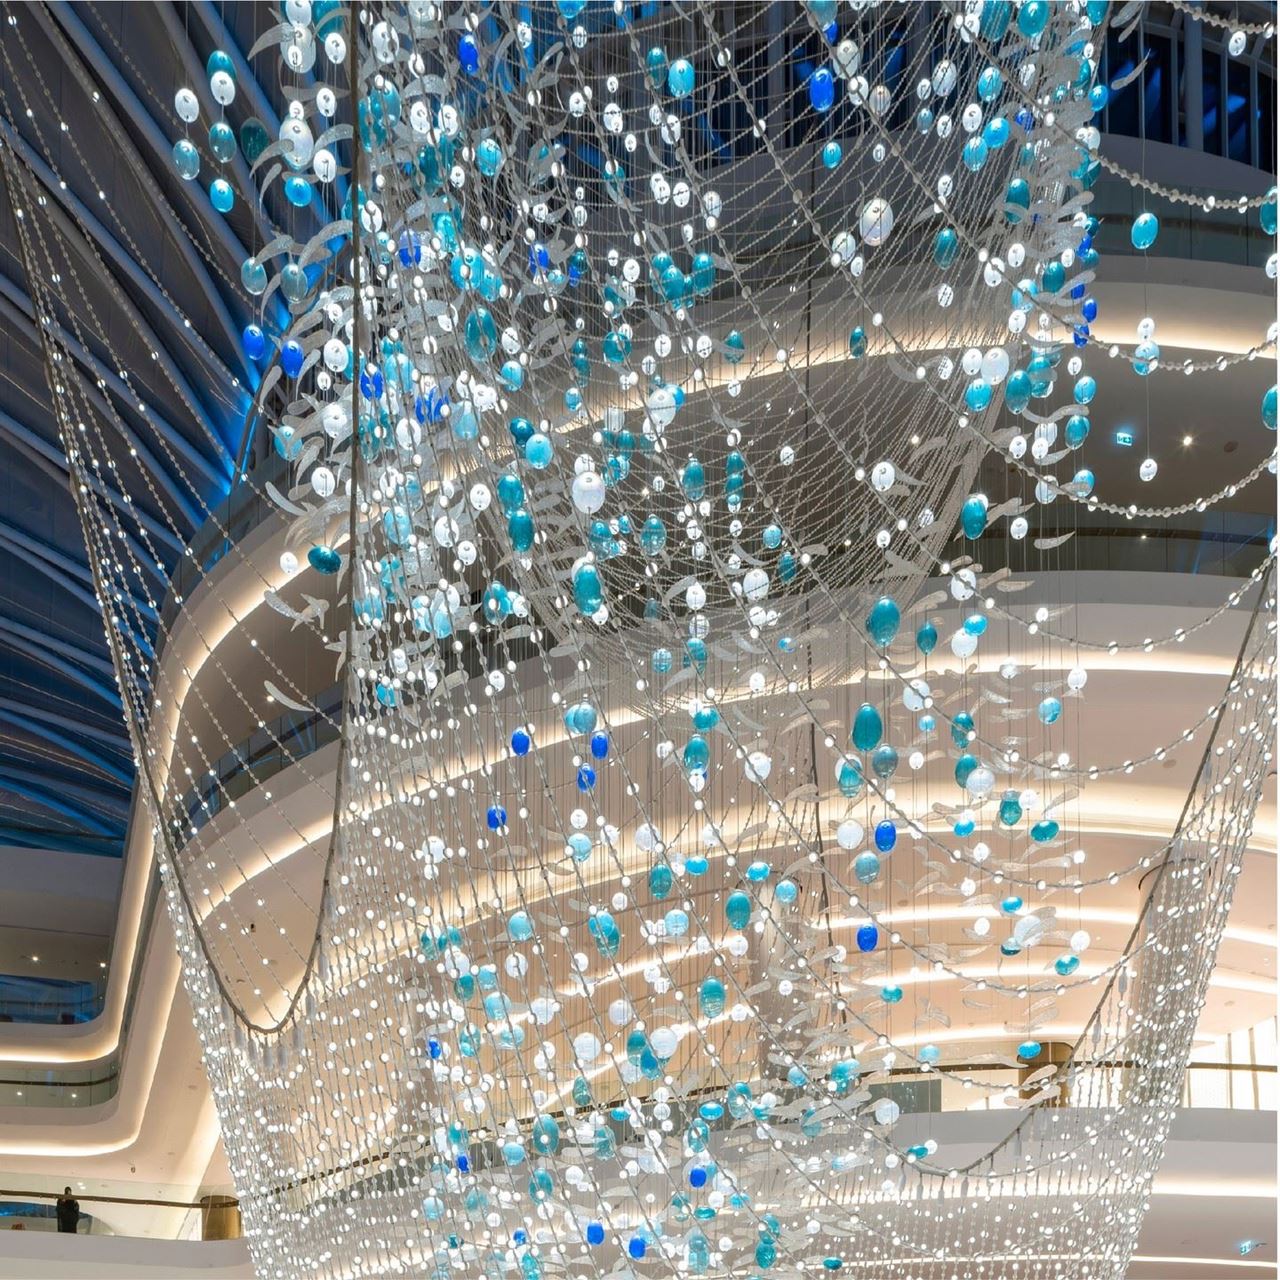 Assima Pearls Chandelier into Guinness World Records